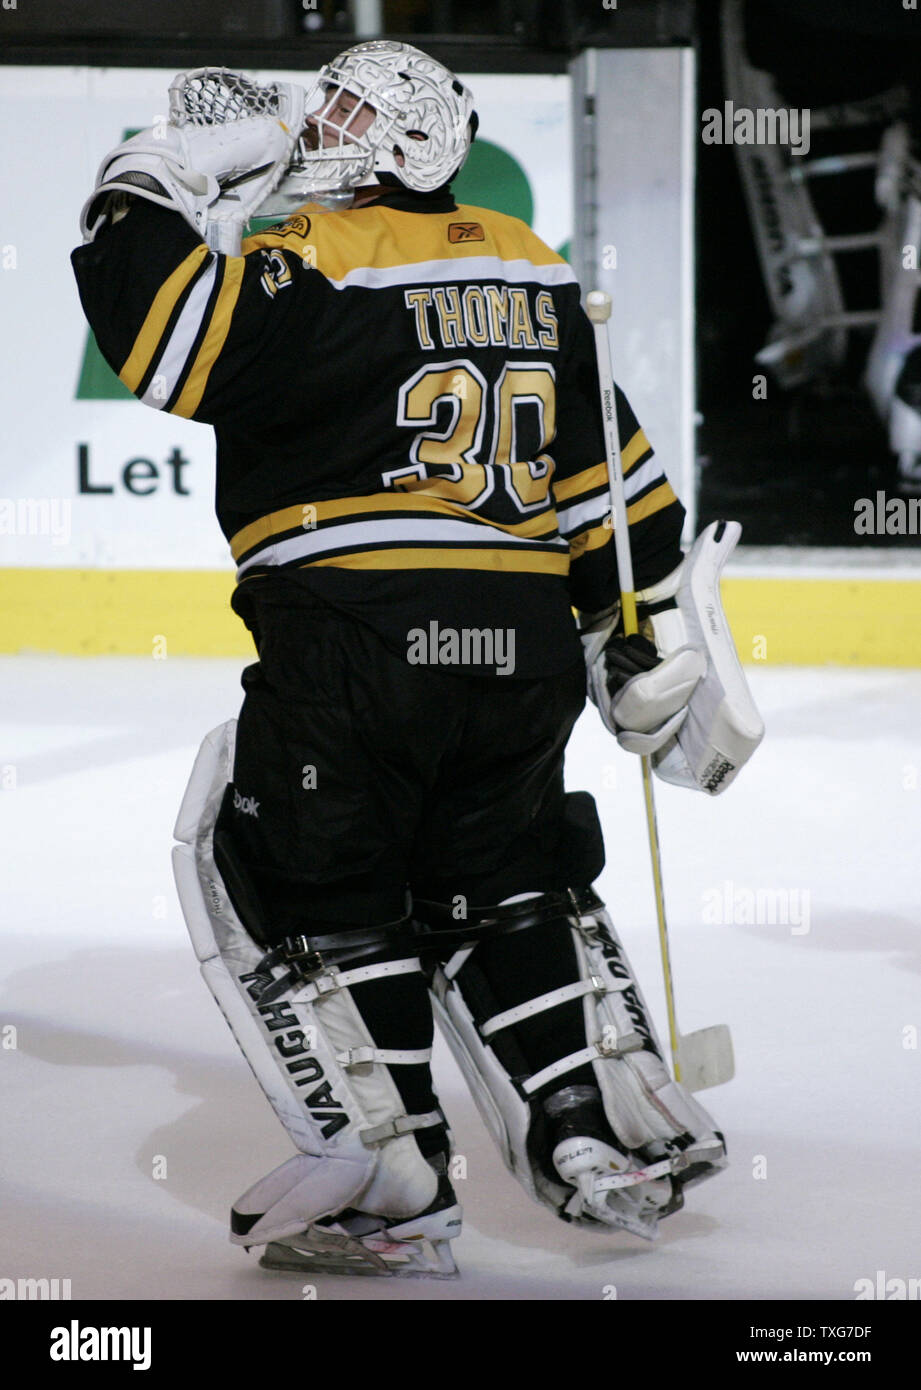 Boston Bruins goaltender Tim Thomas (30) gives a hug to center Gregory  Campbell after the Bruins defeated the Vancouver Canucks 4-0 in game four  of the Stanley Cup Final at TD Garden